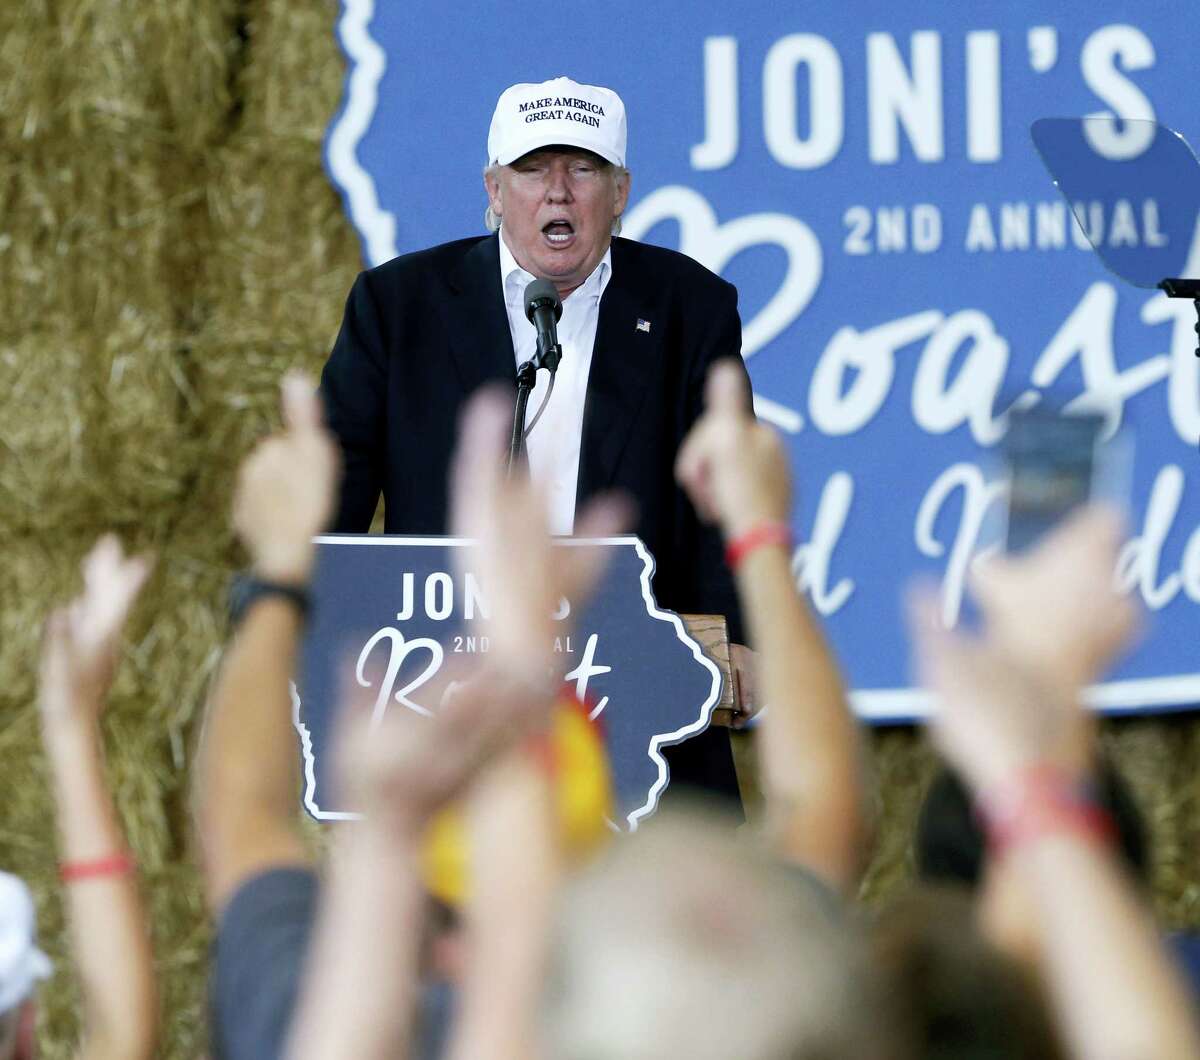 Republican presidential candidate Donald Trump speaks at Joni’s Roast and Ride during a fundraiser at the Iowa State Fairgrounds, in Des Moines, Iowa on Aug. 27, 2016.